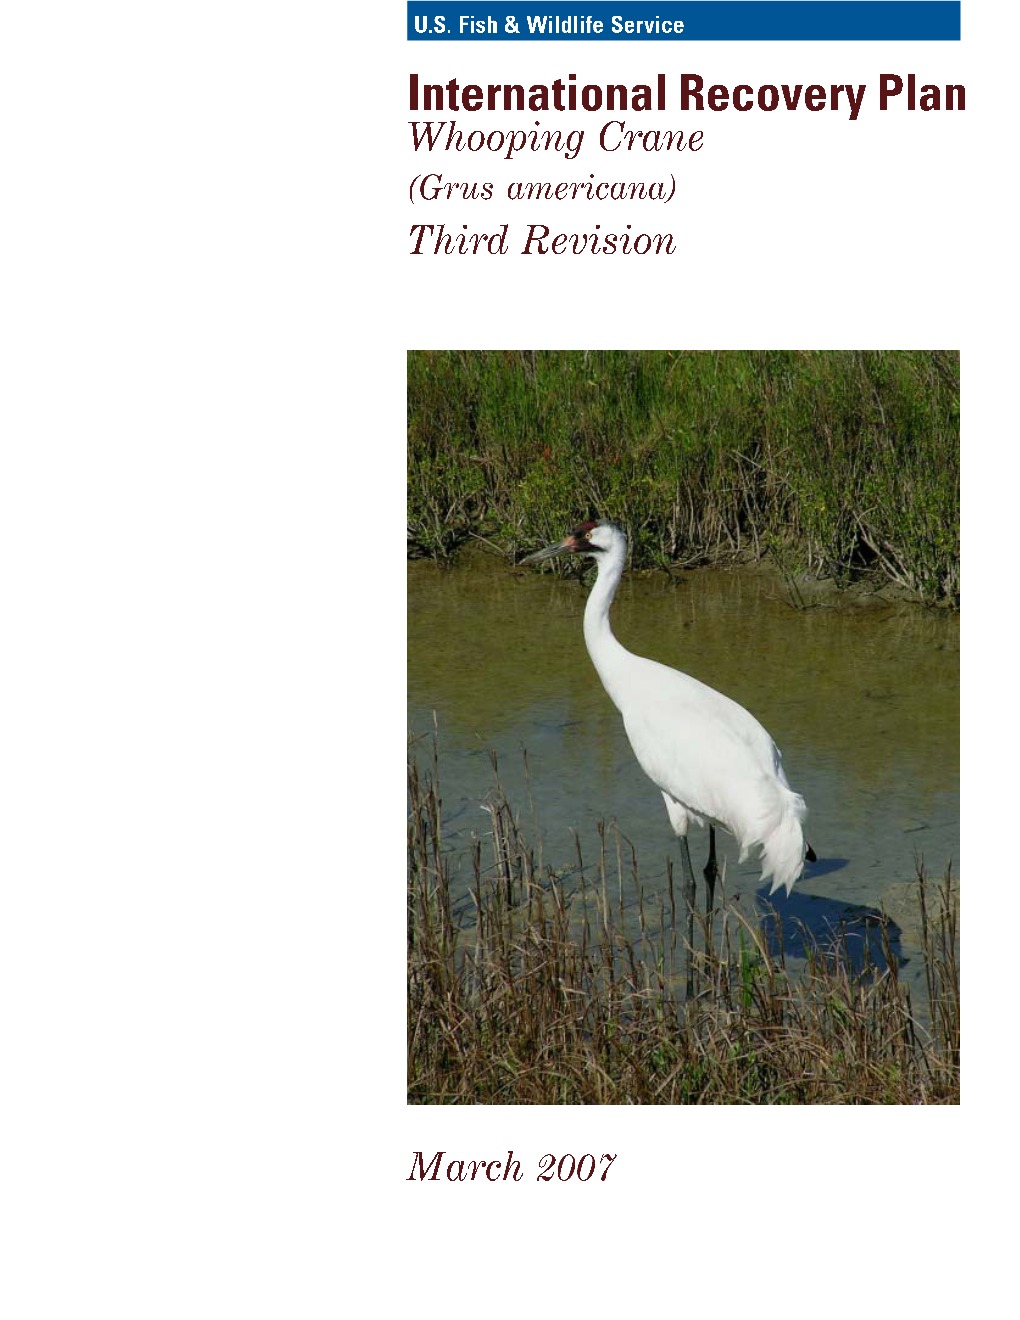 International Recovery Plan for the Whooping Crane